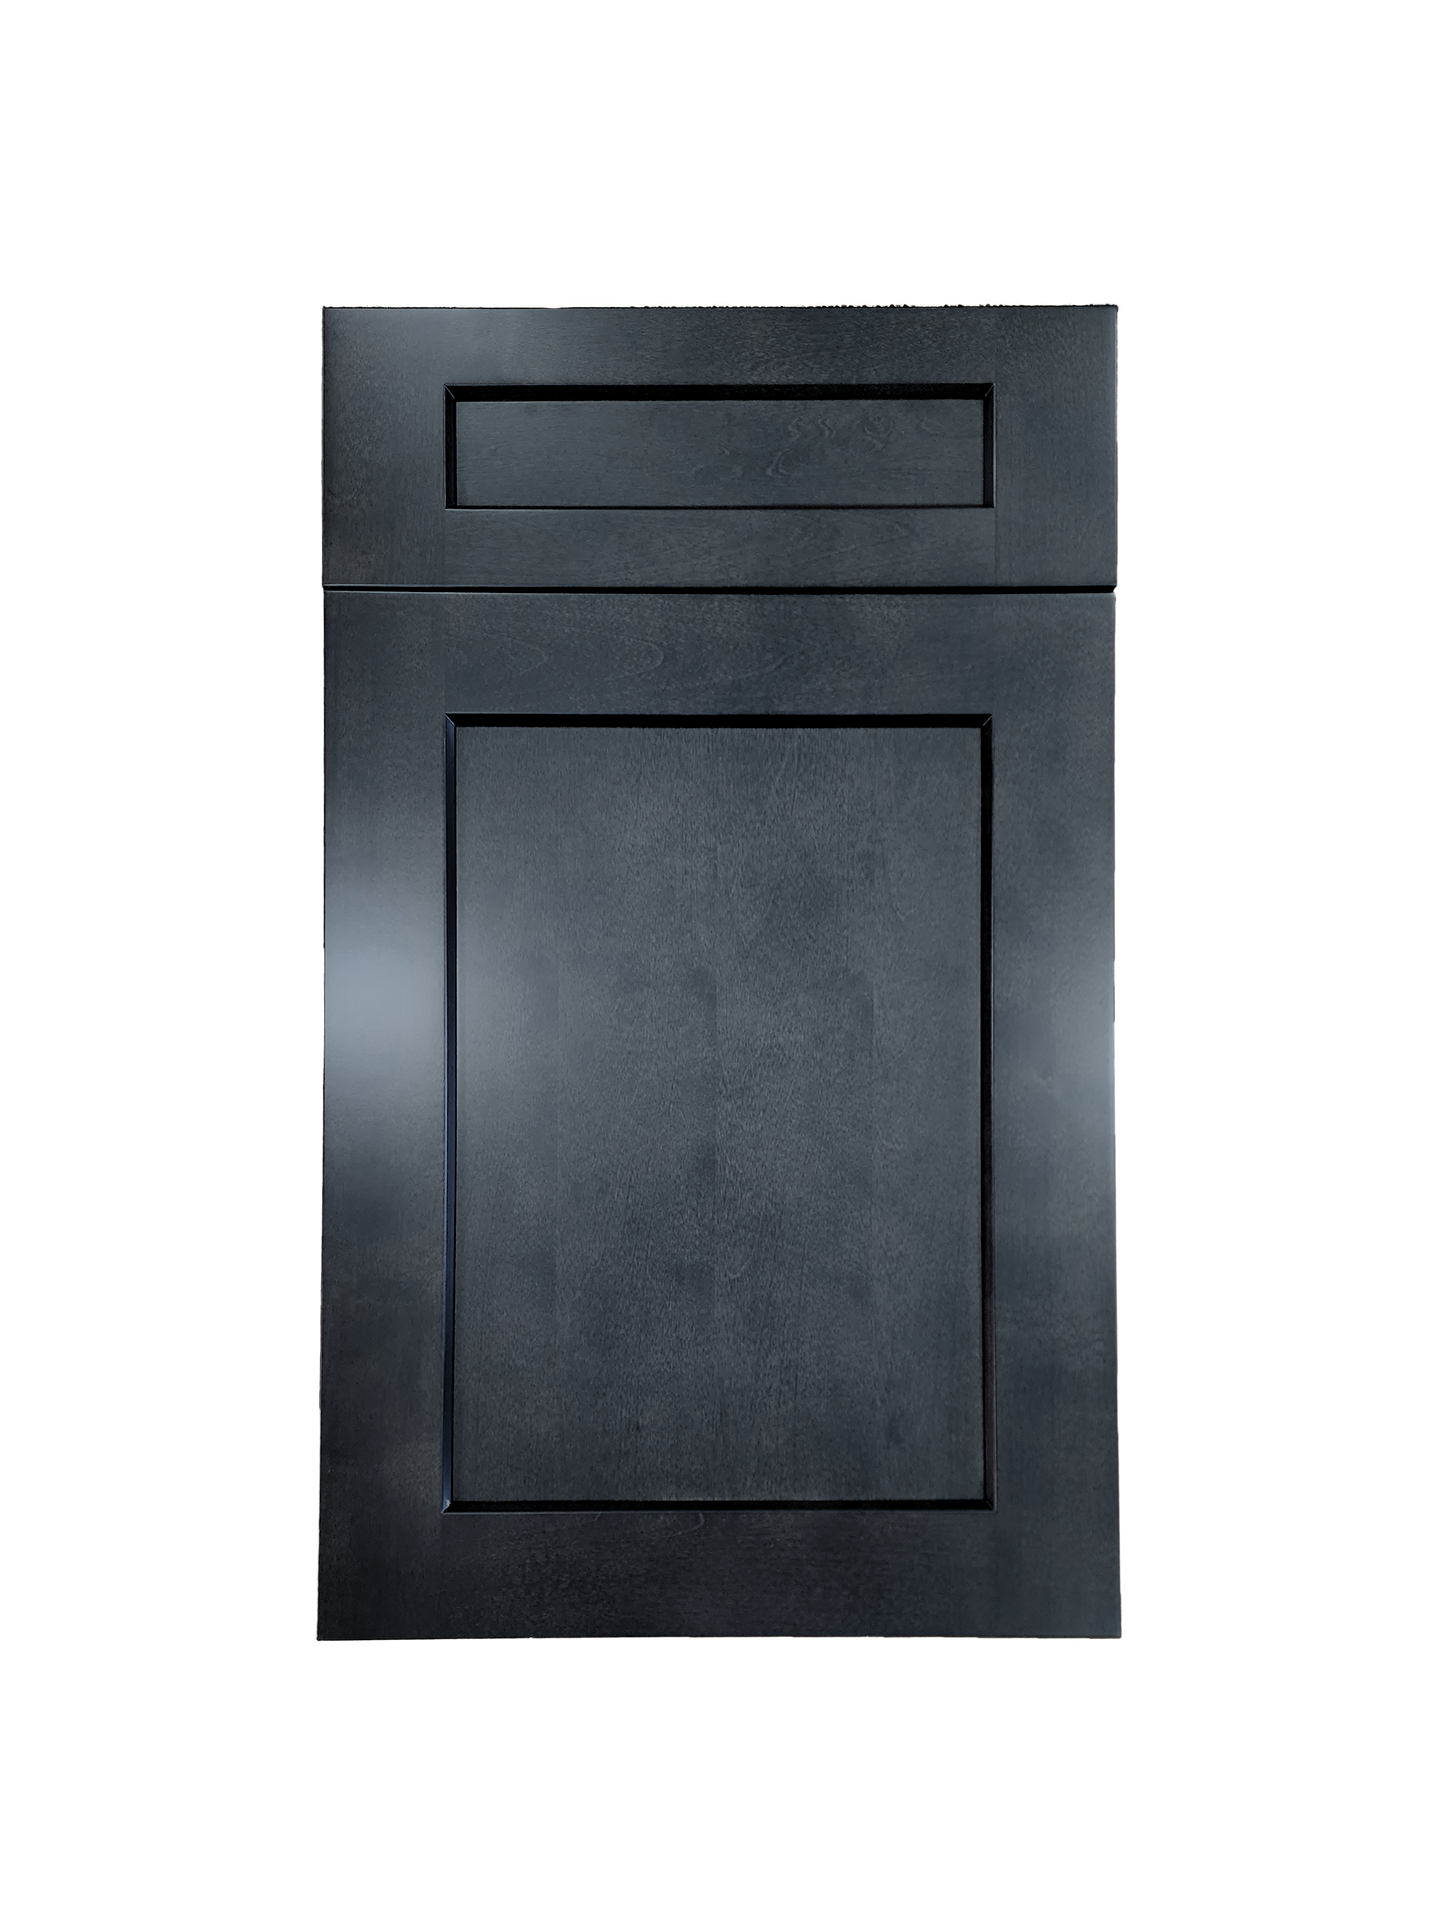 Stormy Grey Oven Cabinet 30 inches wide 24 inches deep 96 inches tall with Stormy Grey box and Stormy Grey doors